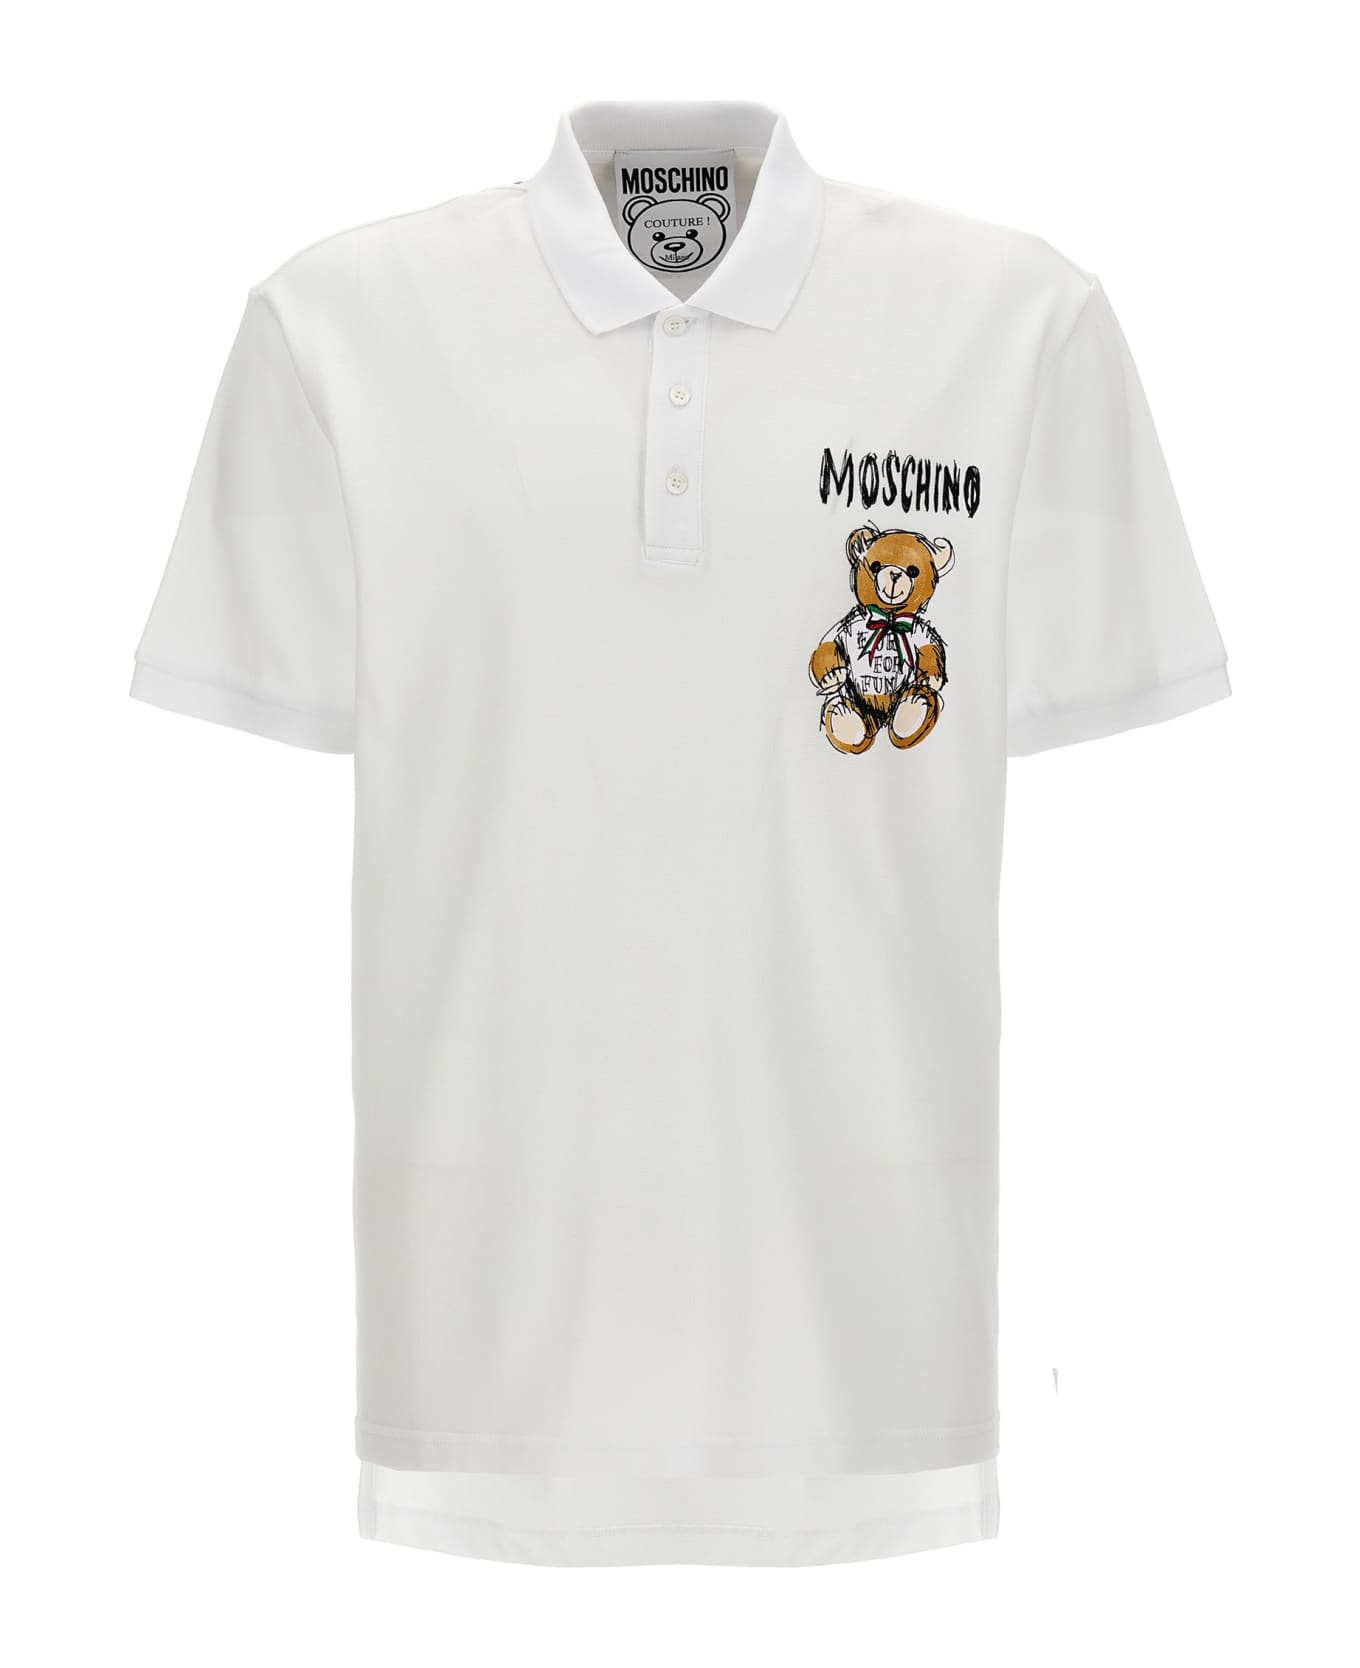 Moschino 'archive Teddy' Polo Shirt - White ポロシャツ